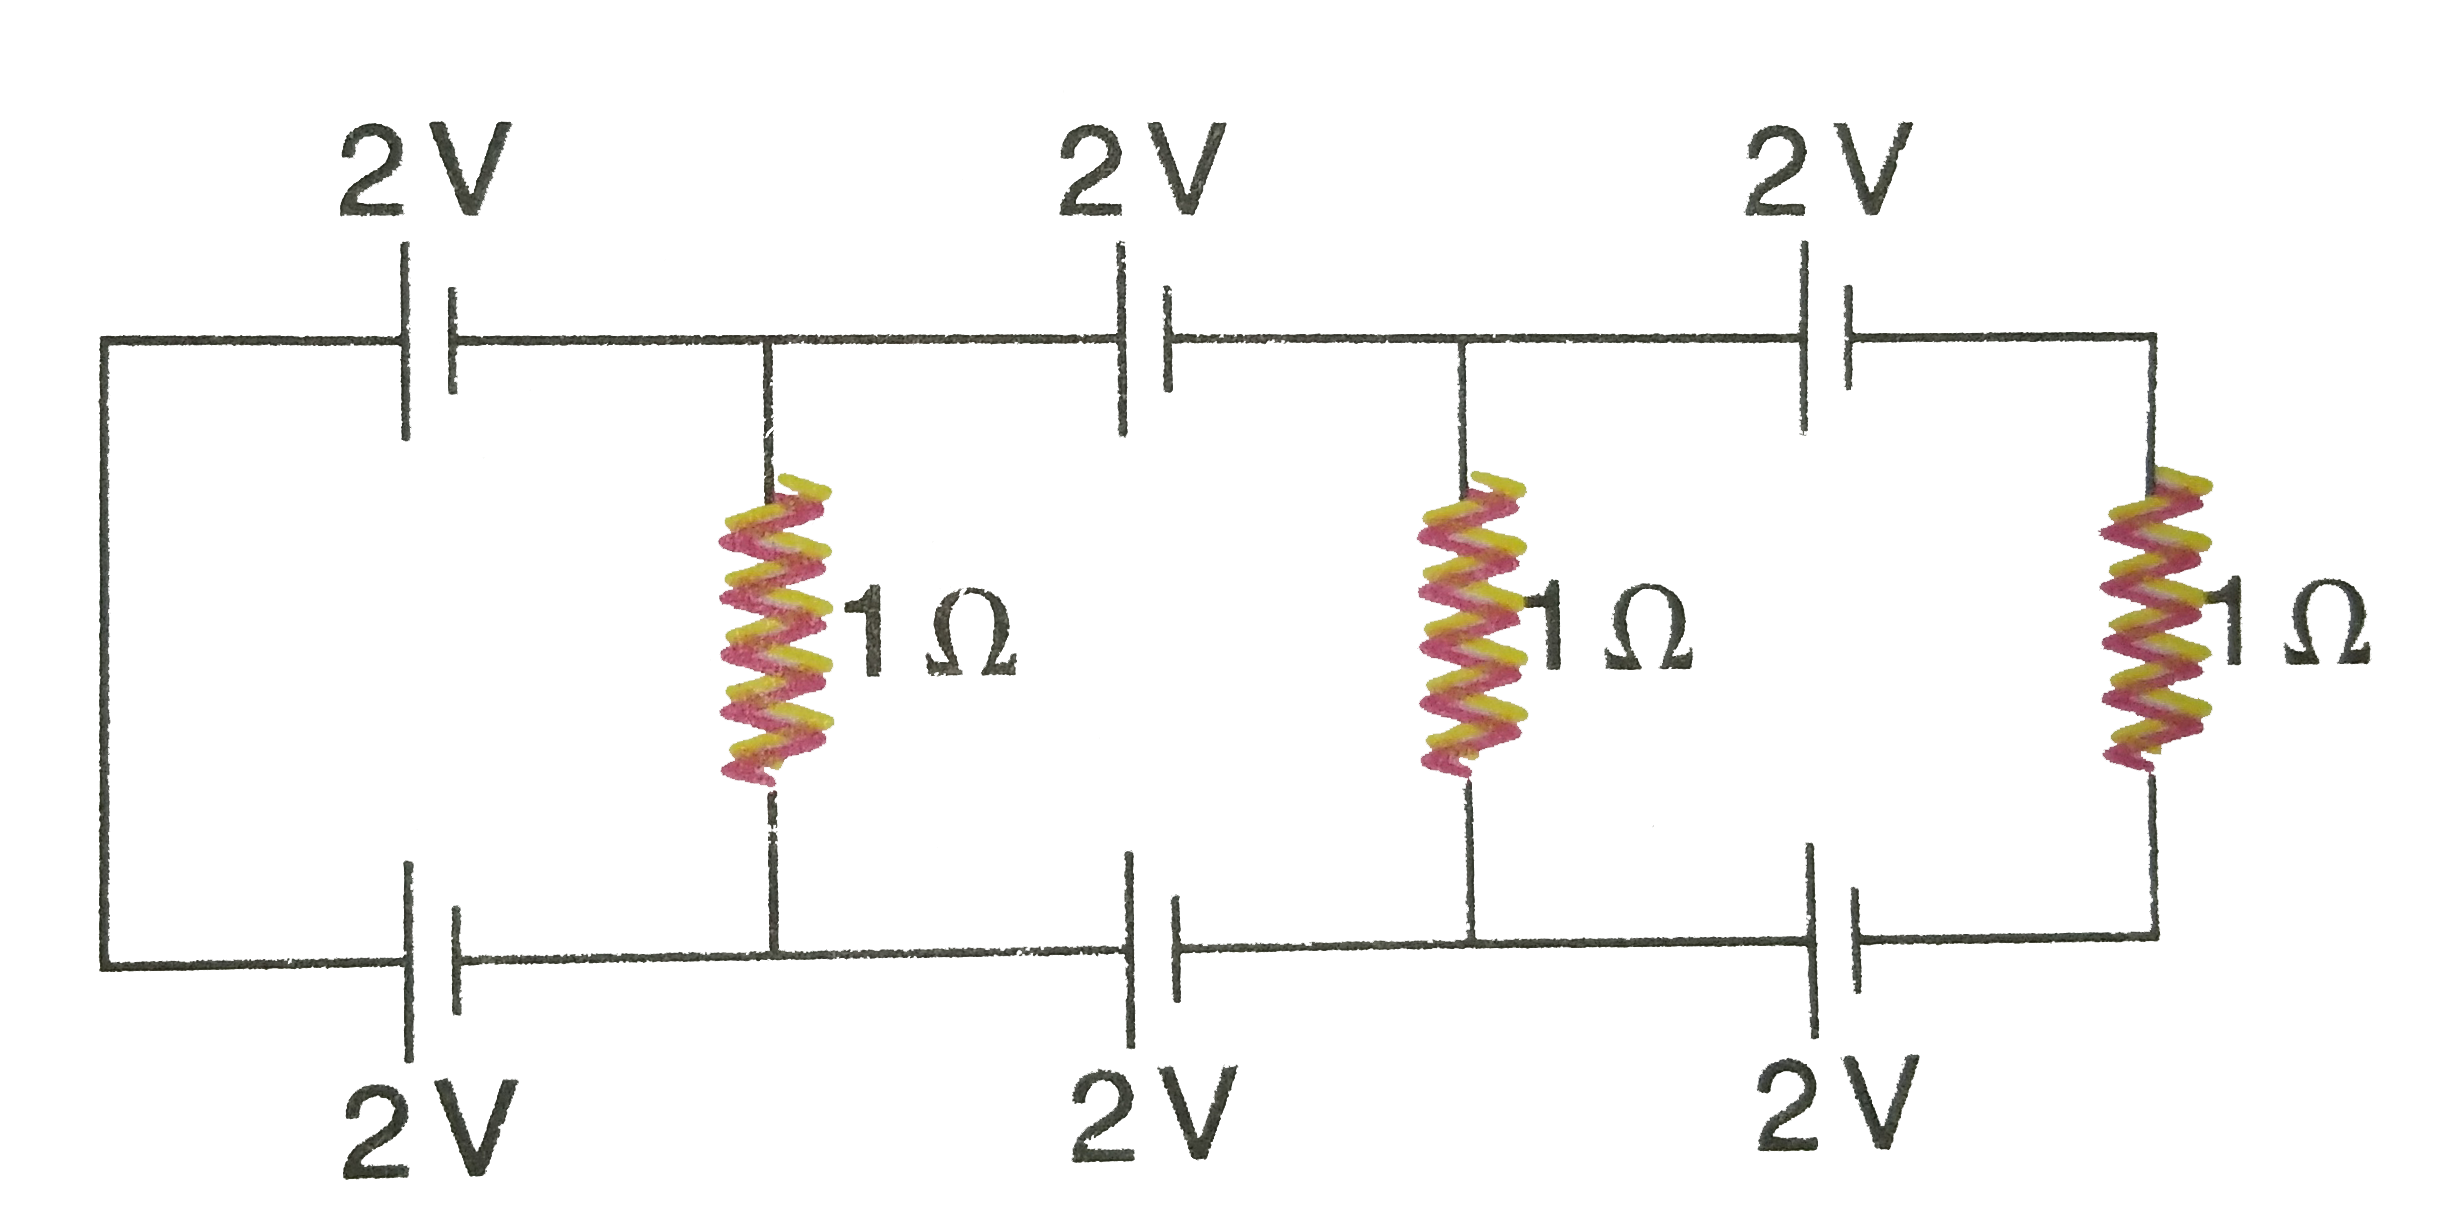 In the given circuit the current in each resistance is